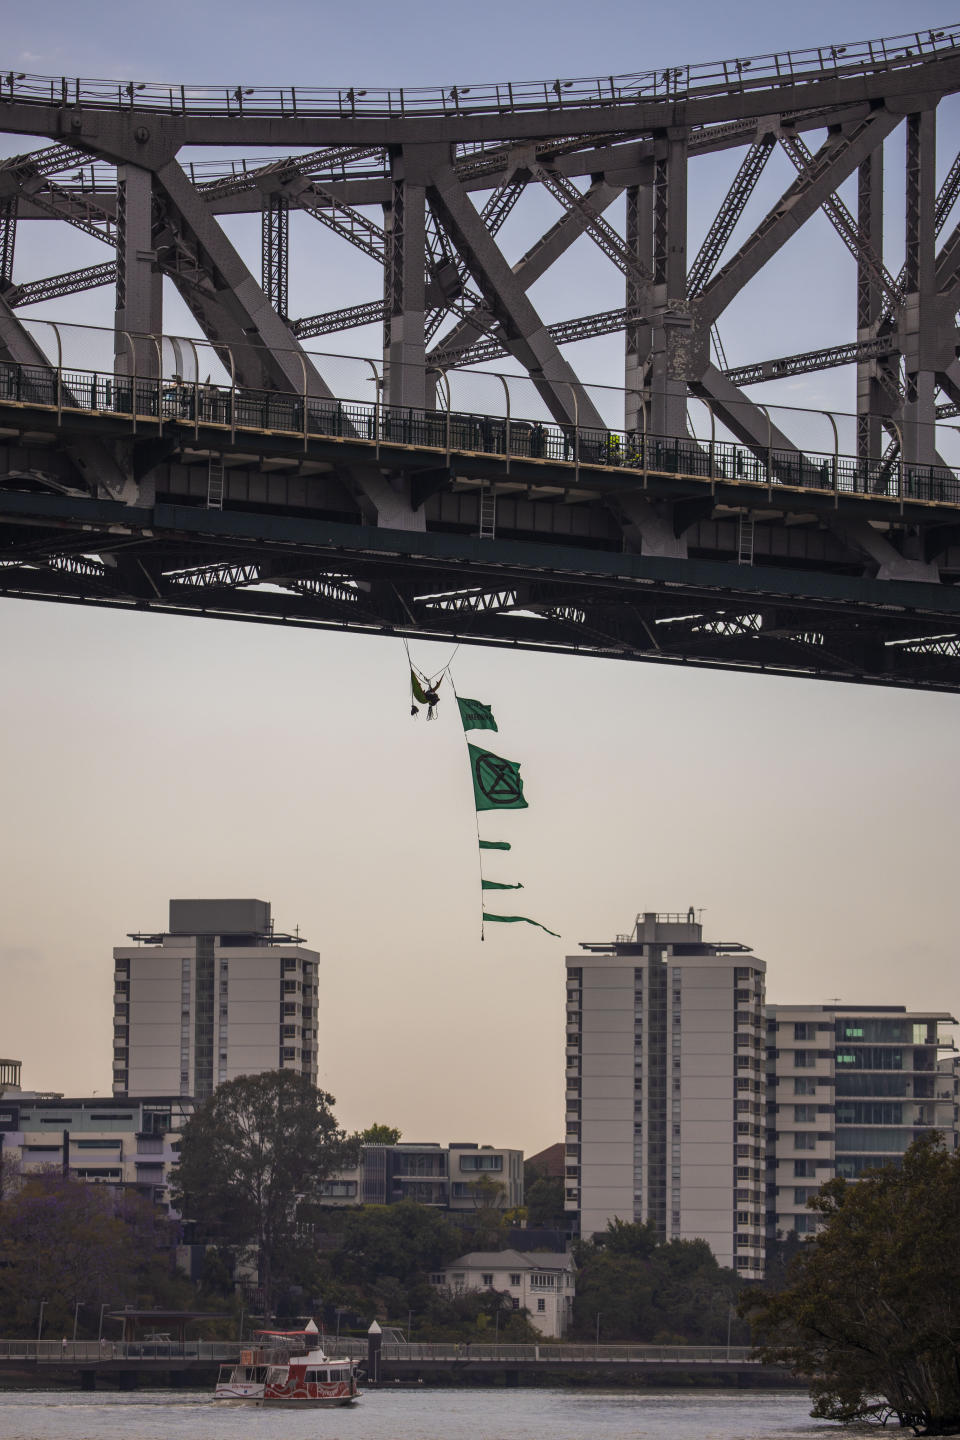 The activist hangs from the bridge with a series of flags. Source: AAP